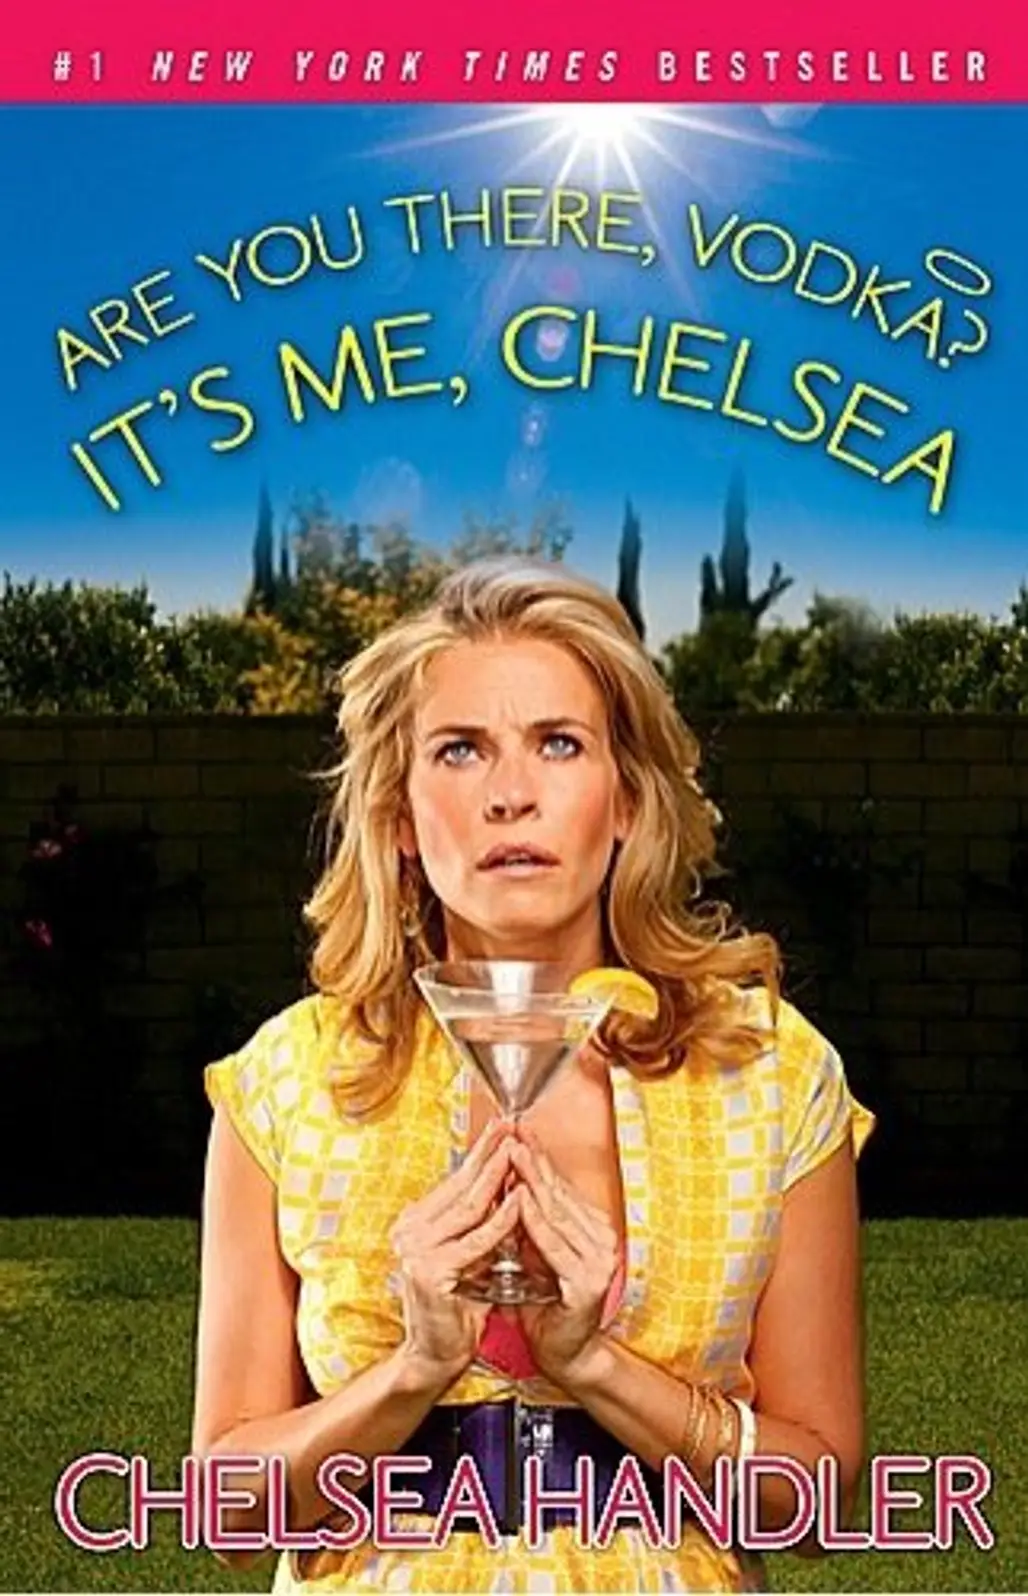 Are You There, Vodka? It’s Me, Chelsea by Chelsea Handler